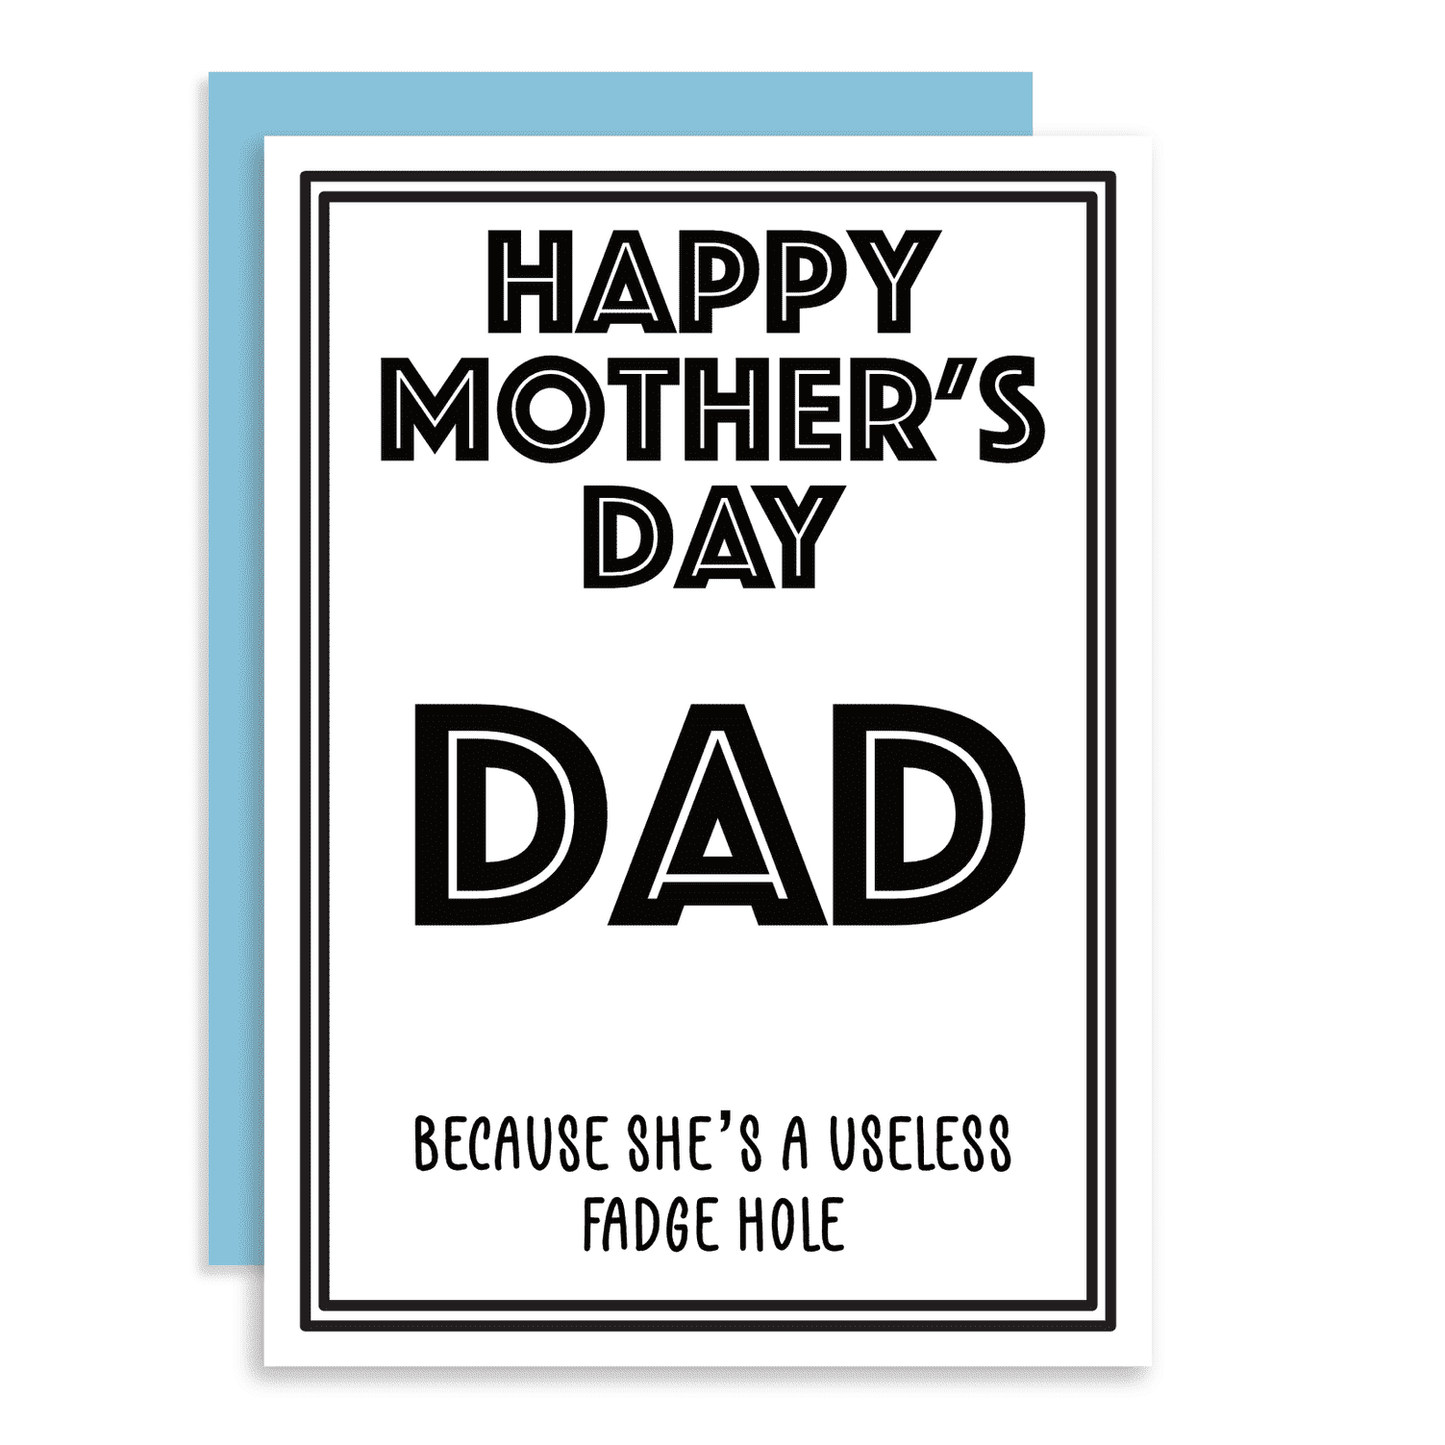 Card - Happy Mother’s Day DAD because she's a useless fadge hole